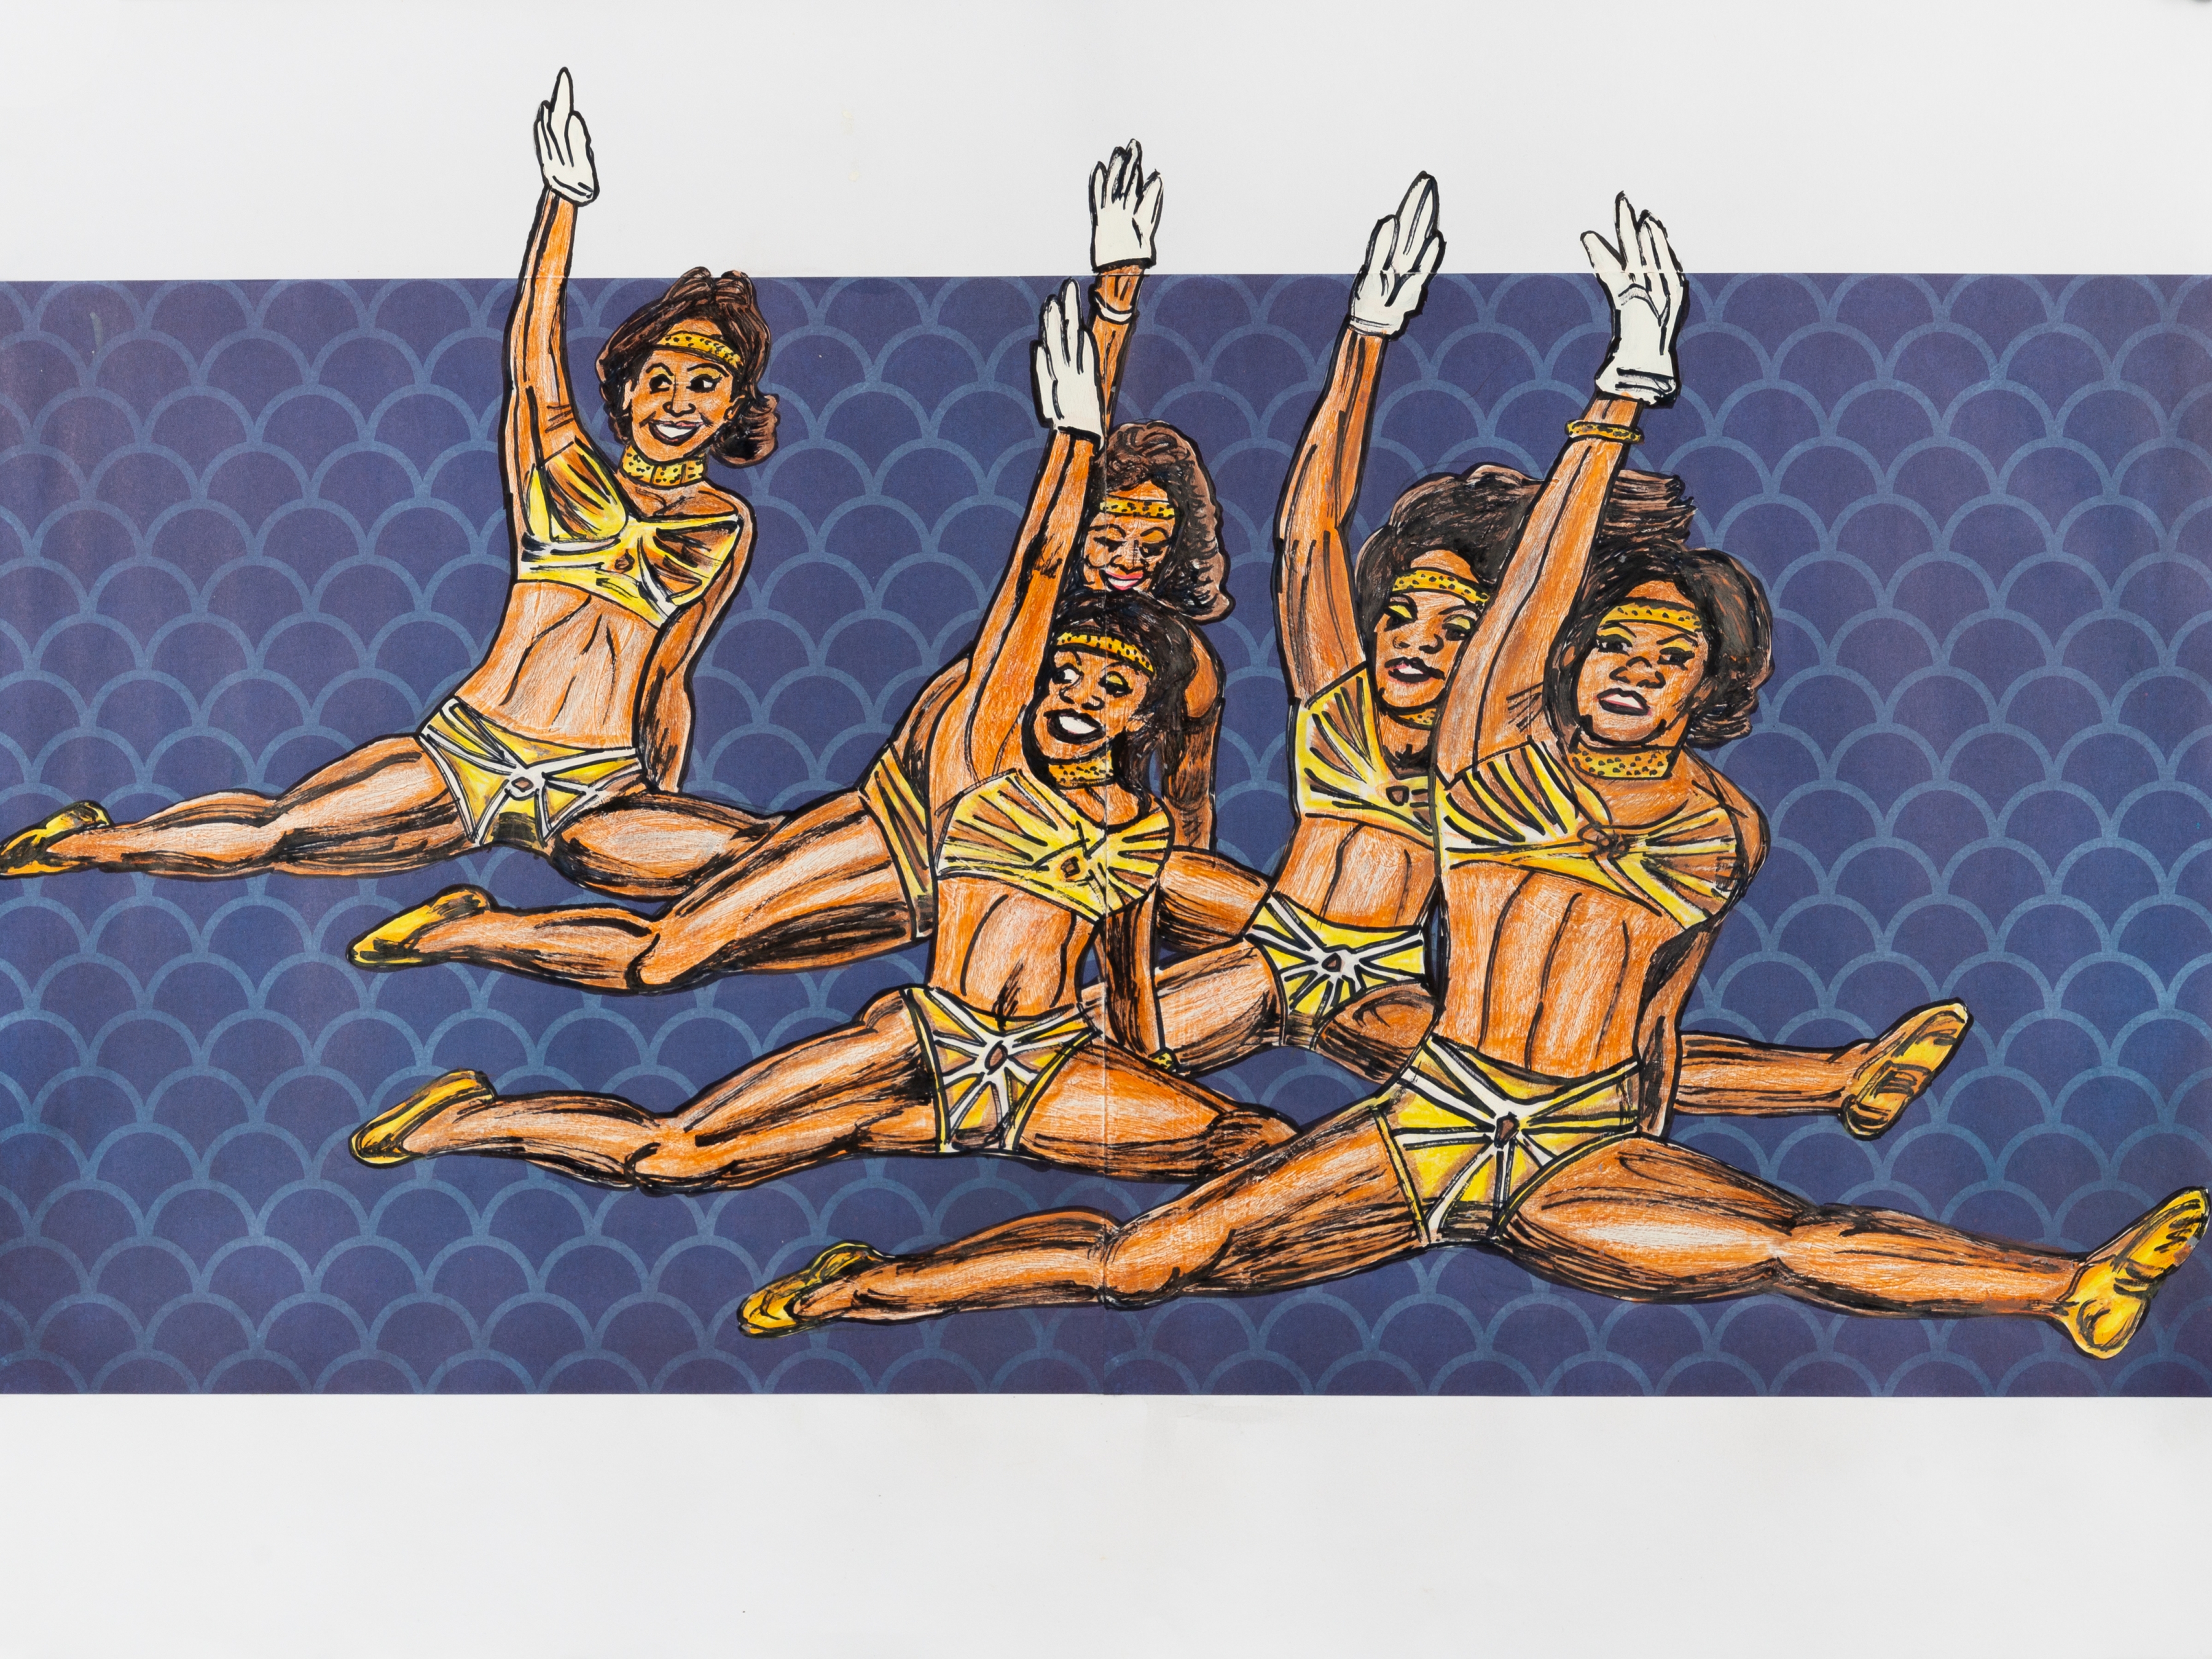 Keith Duncan, Southern University Dance Team 2, 2020
18 x 24 inches